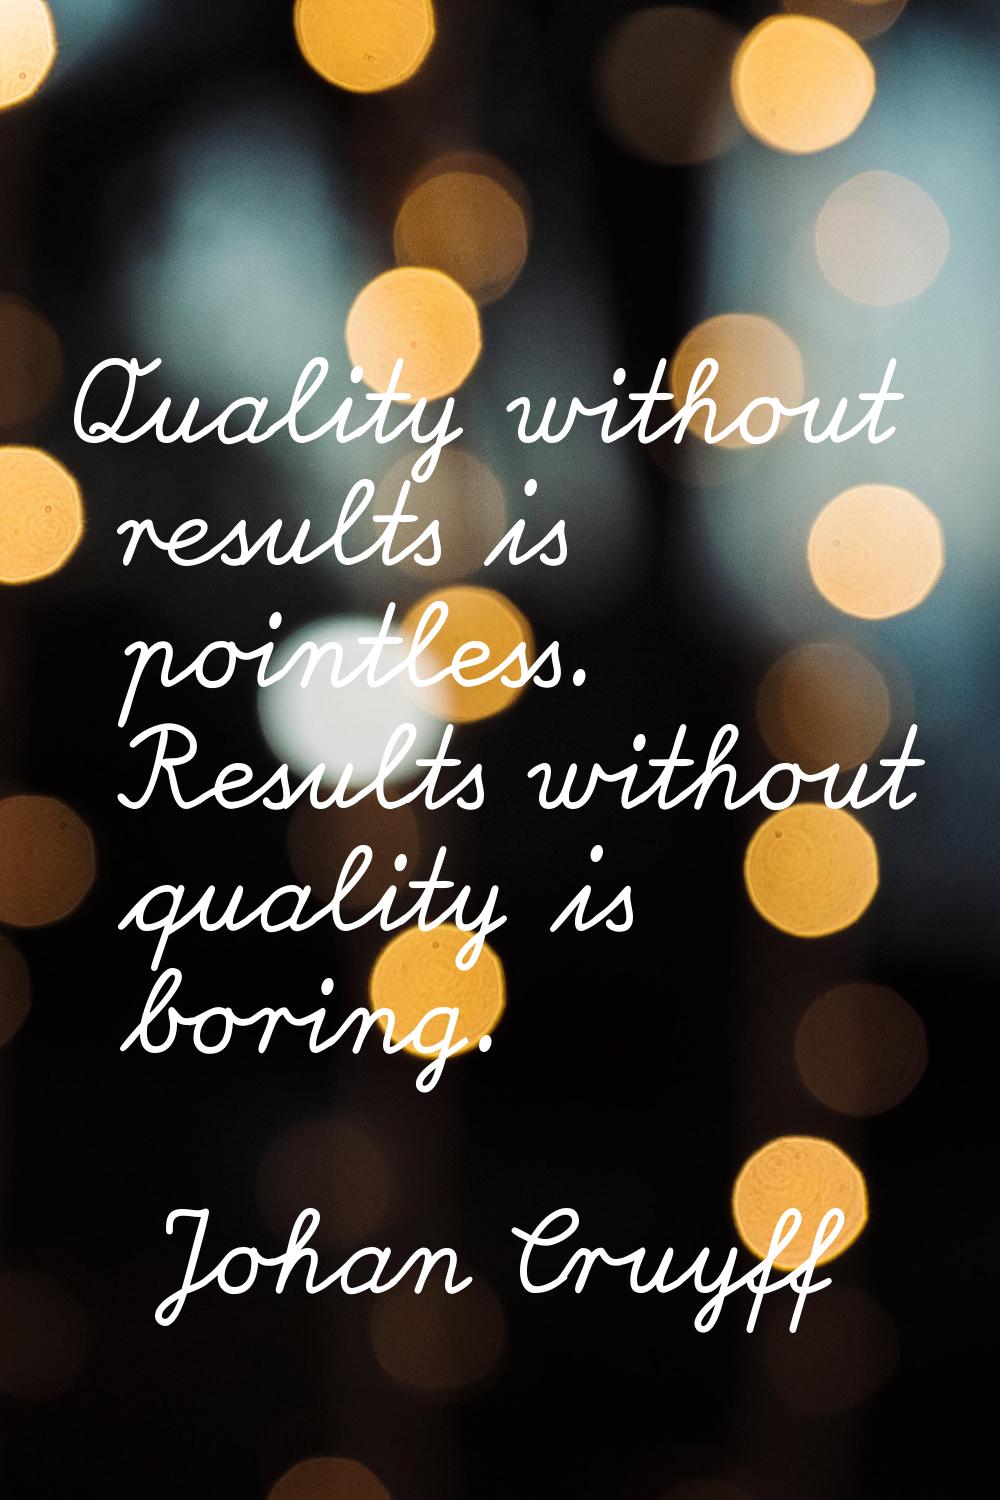 Quality without results is pointless. Results without quality is boring.